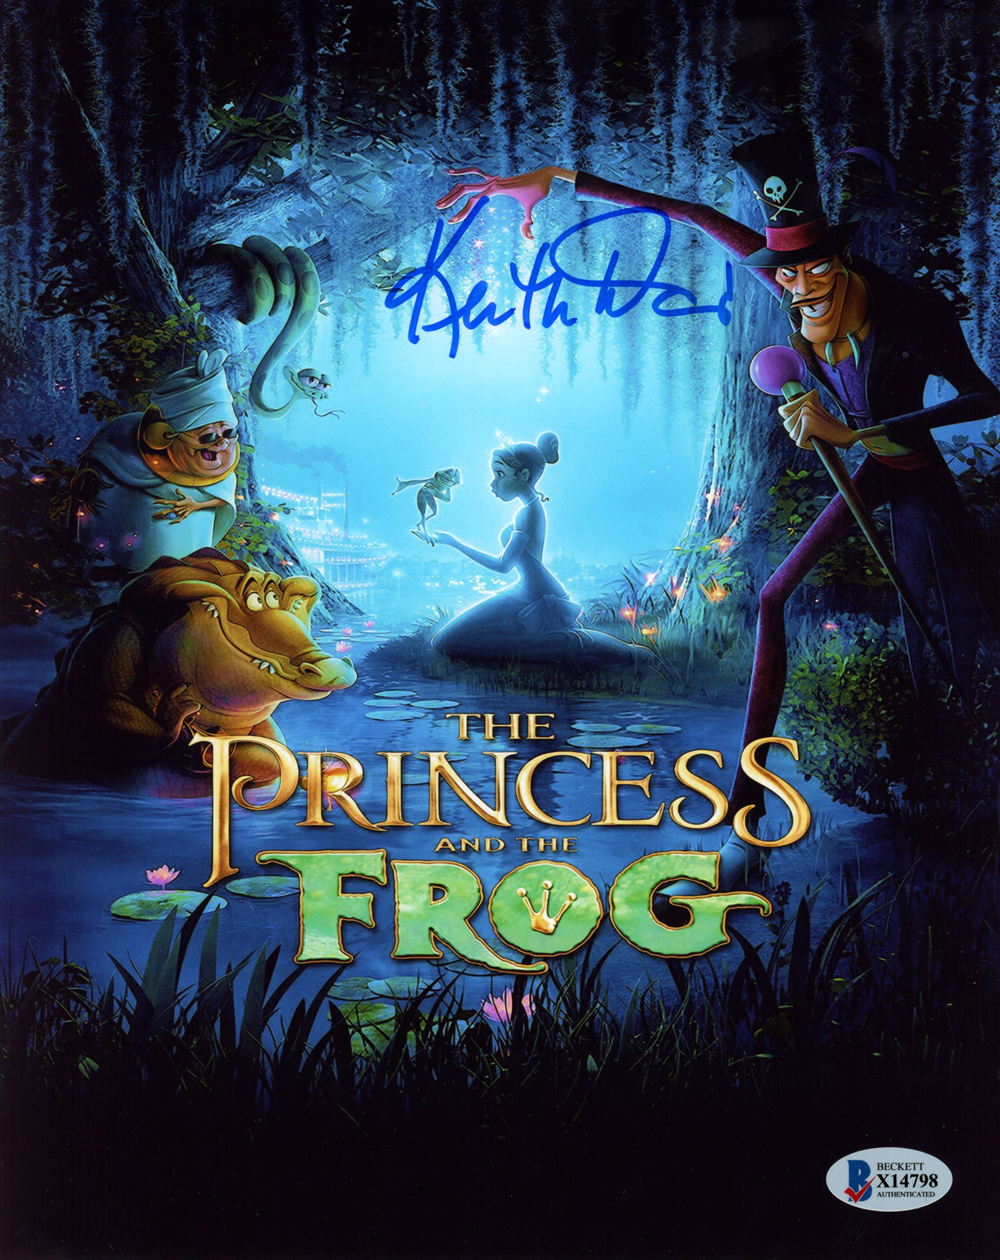 Keith David Signed The Princess And The Frog 8x10 Photograph Beckett